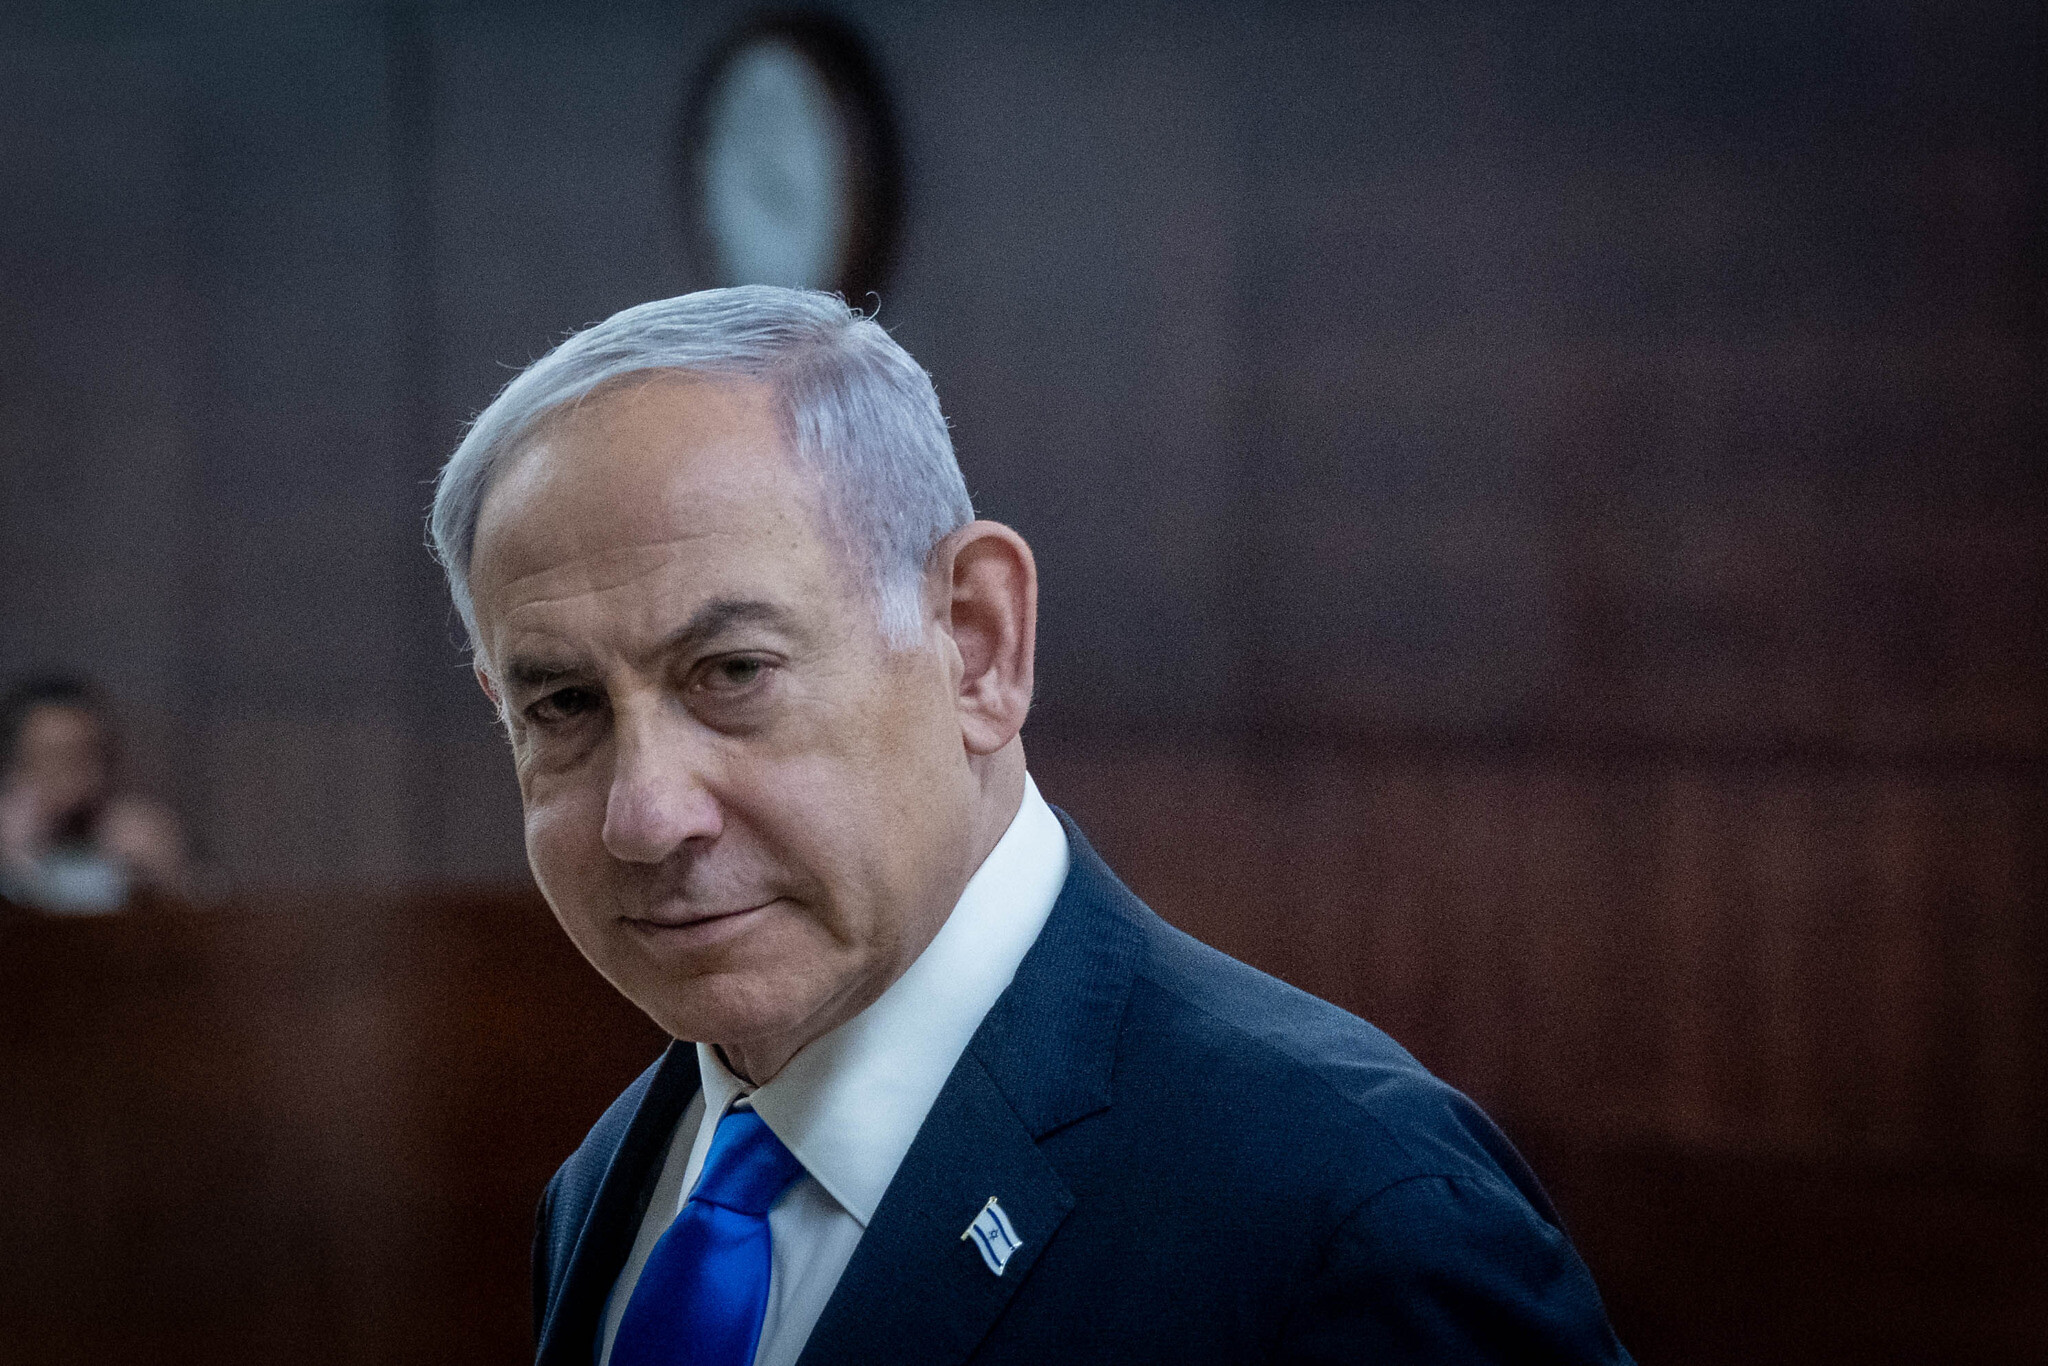 Netanyahu, Gallant emphatic war will resume soon, though current truce may be extended - The Times of Israel